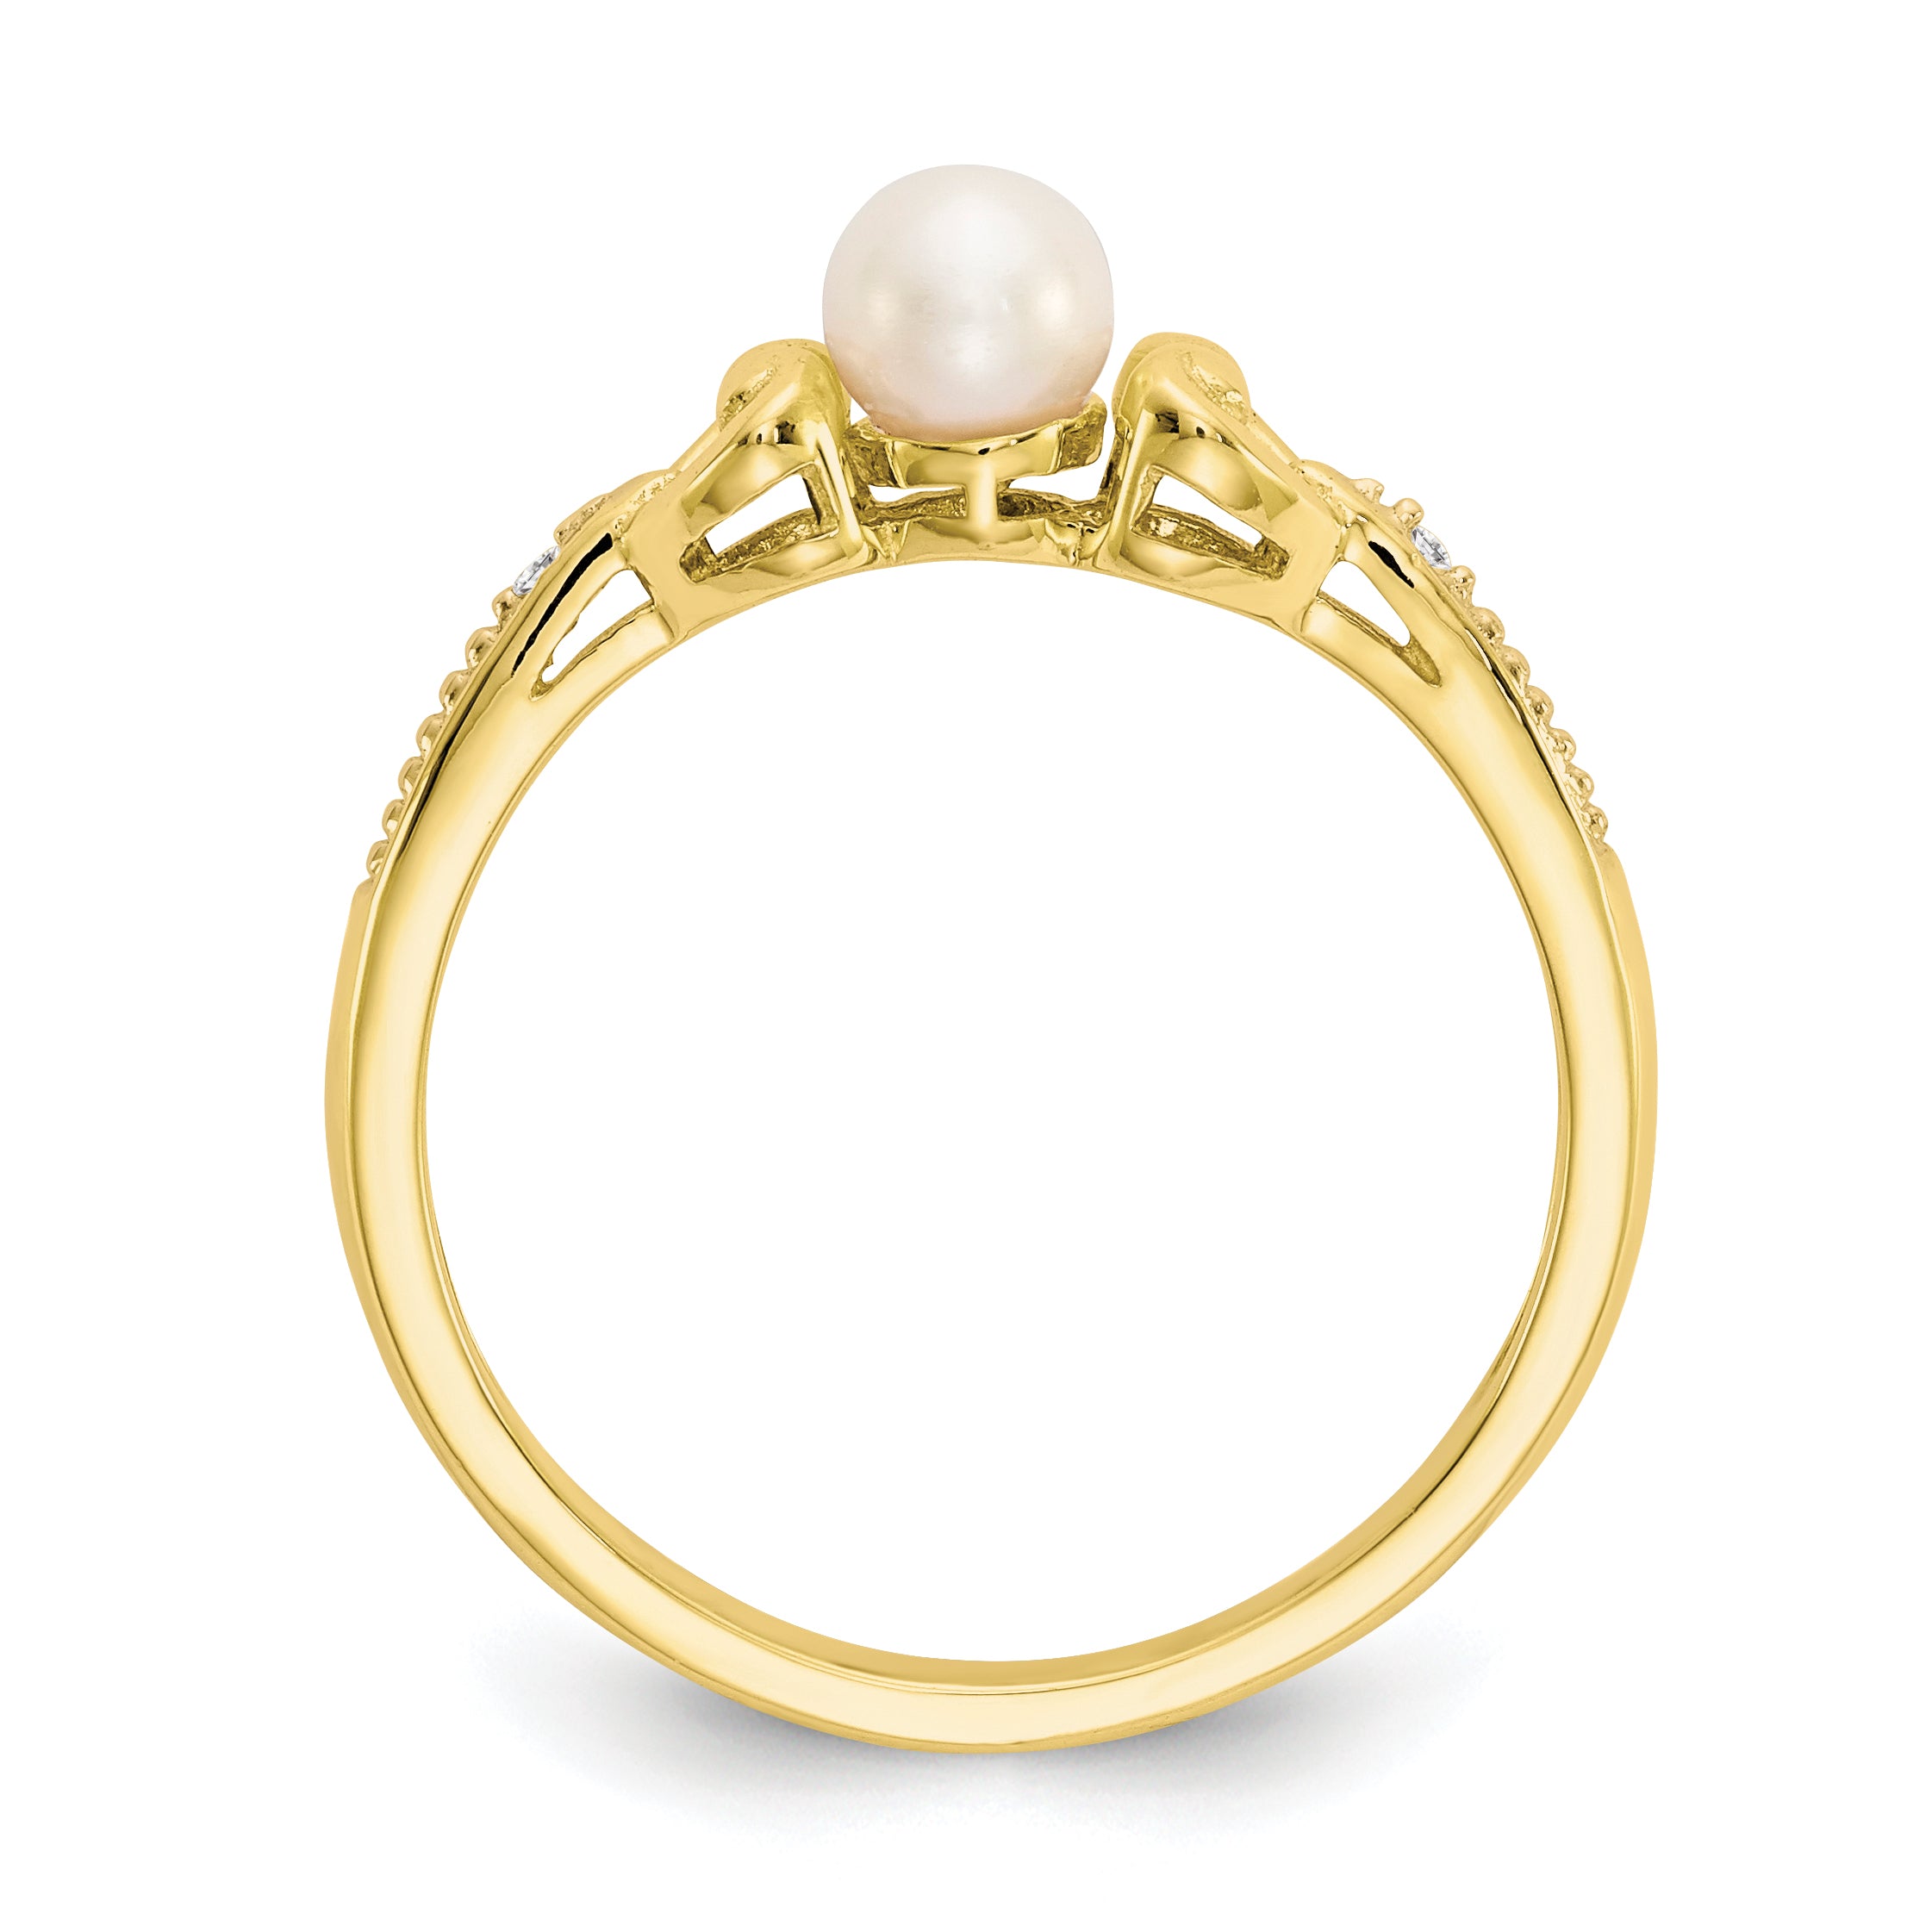 10K Fresh Water Cultured Pearl and Diamond Ring